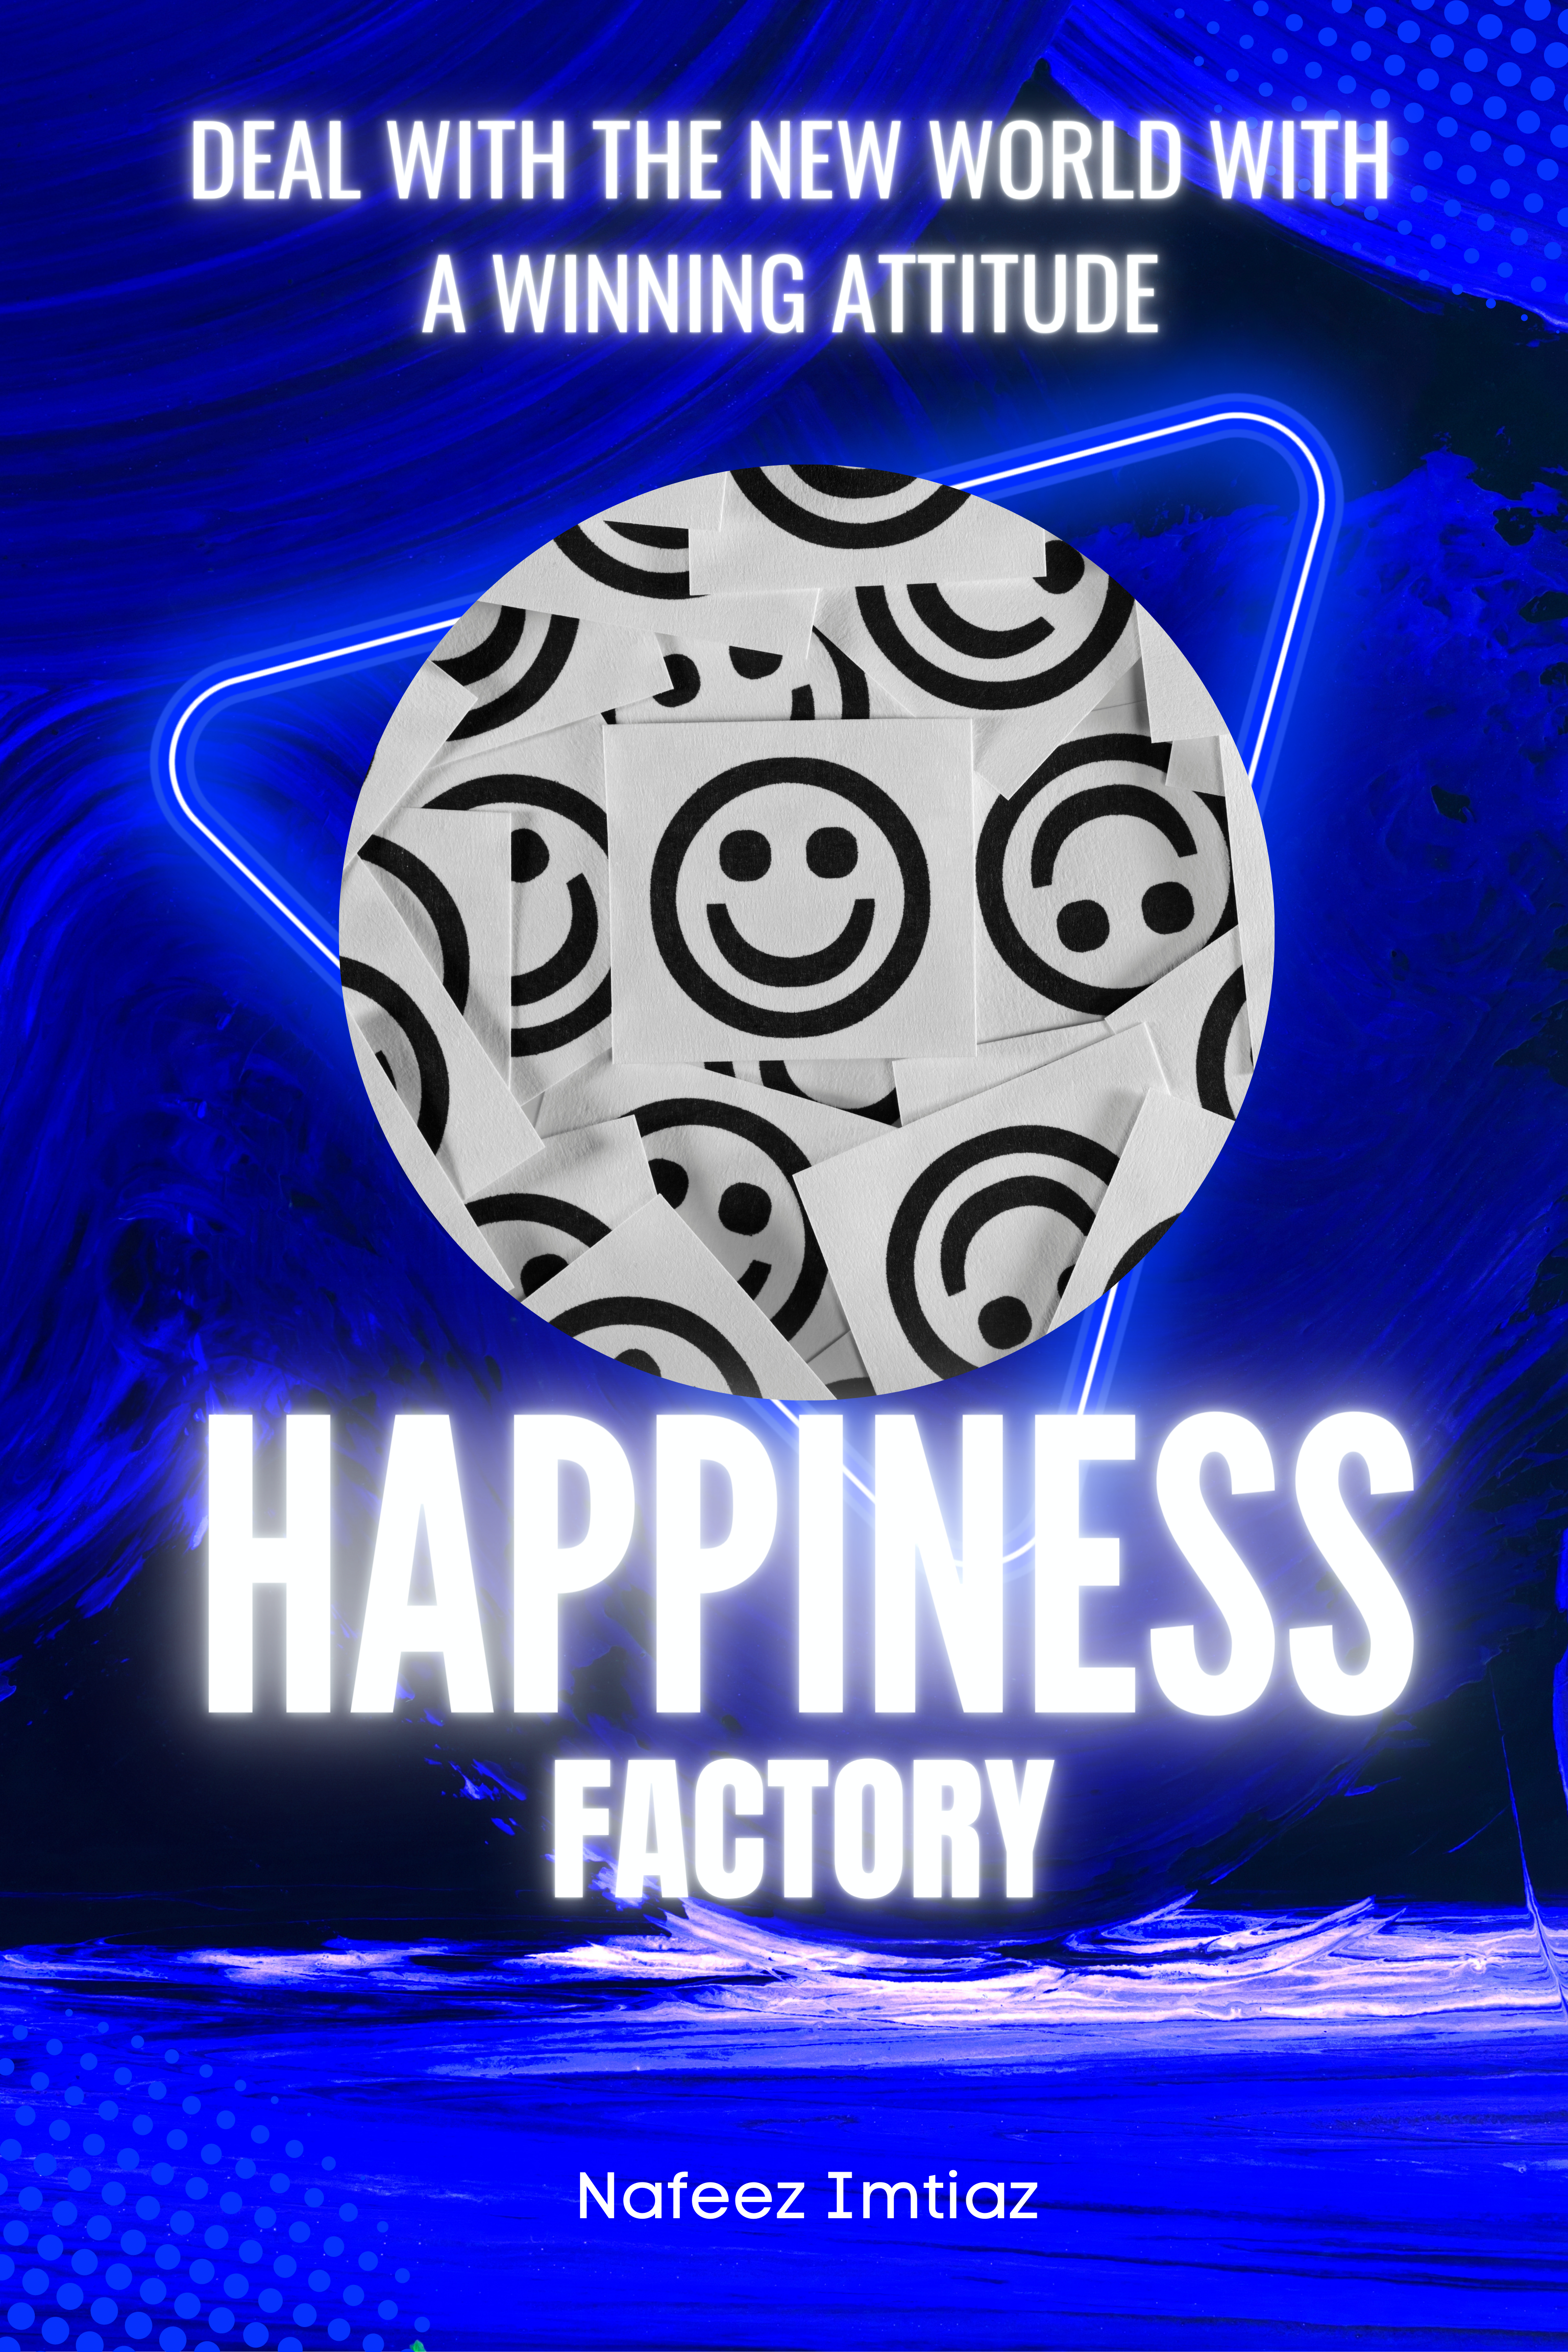 FREE: Happiness Factory: Deal With The New World With A Winning Attitude by Nafeez Imtiaz